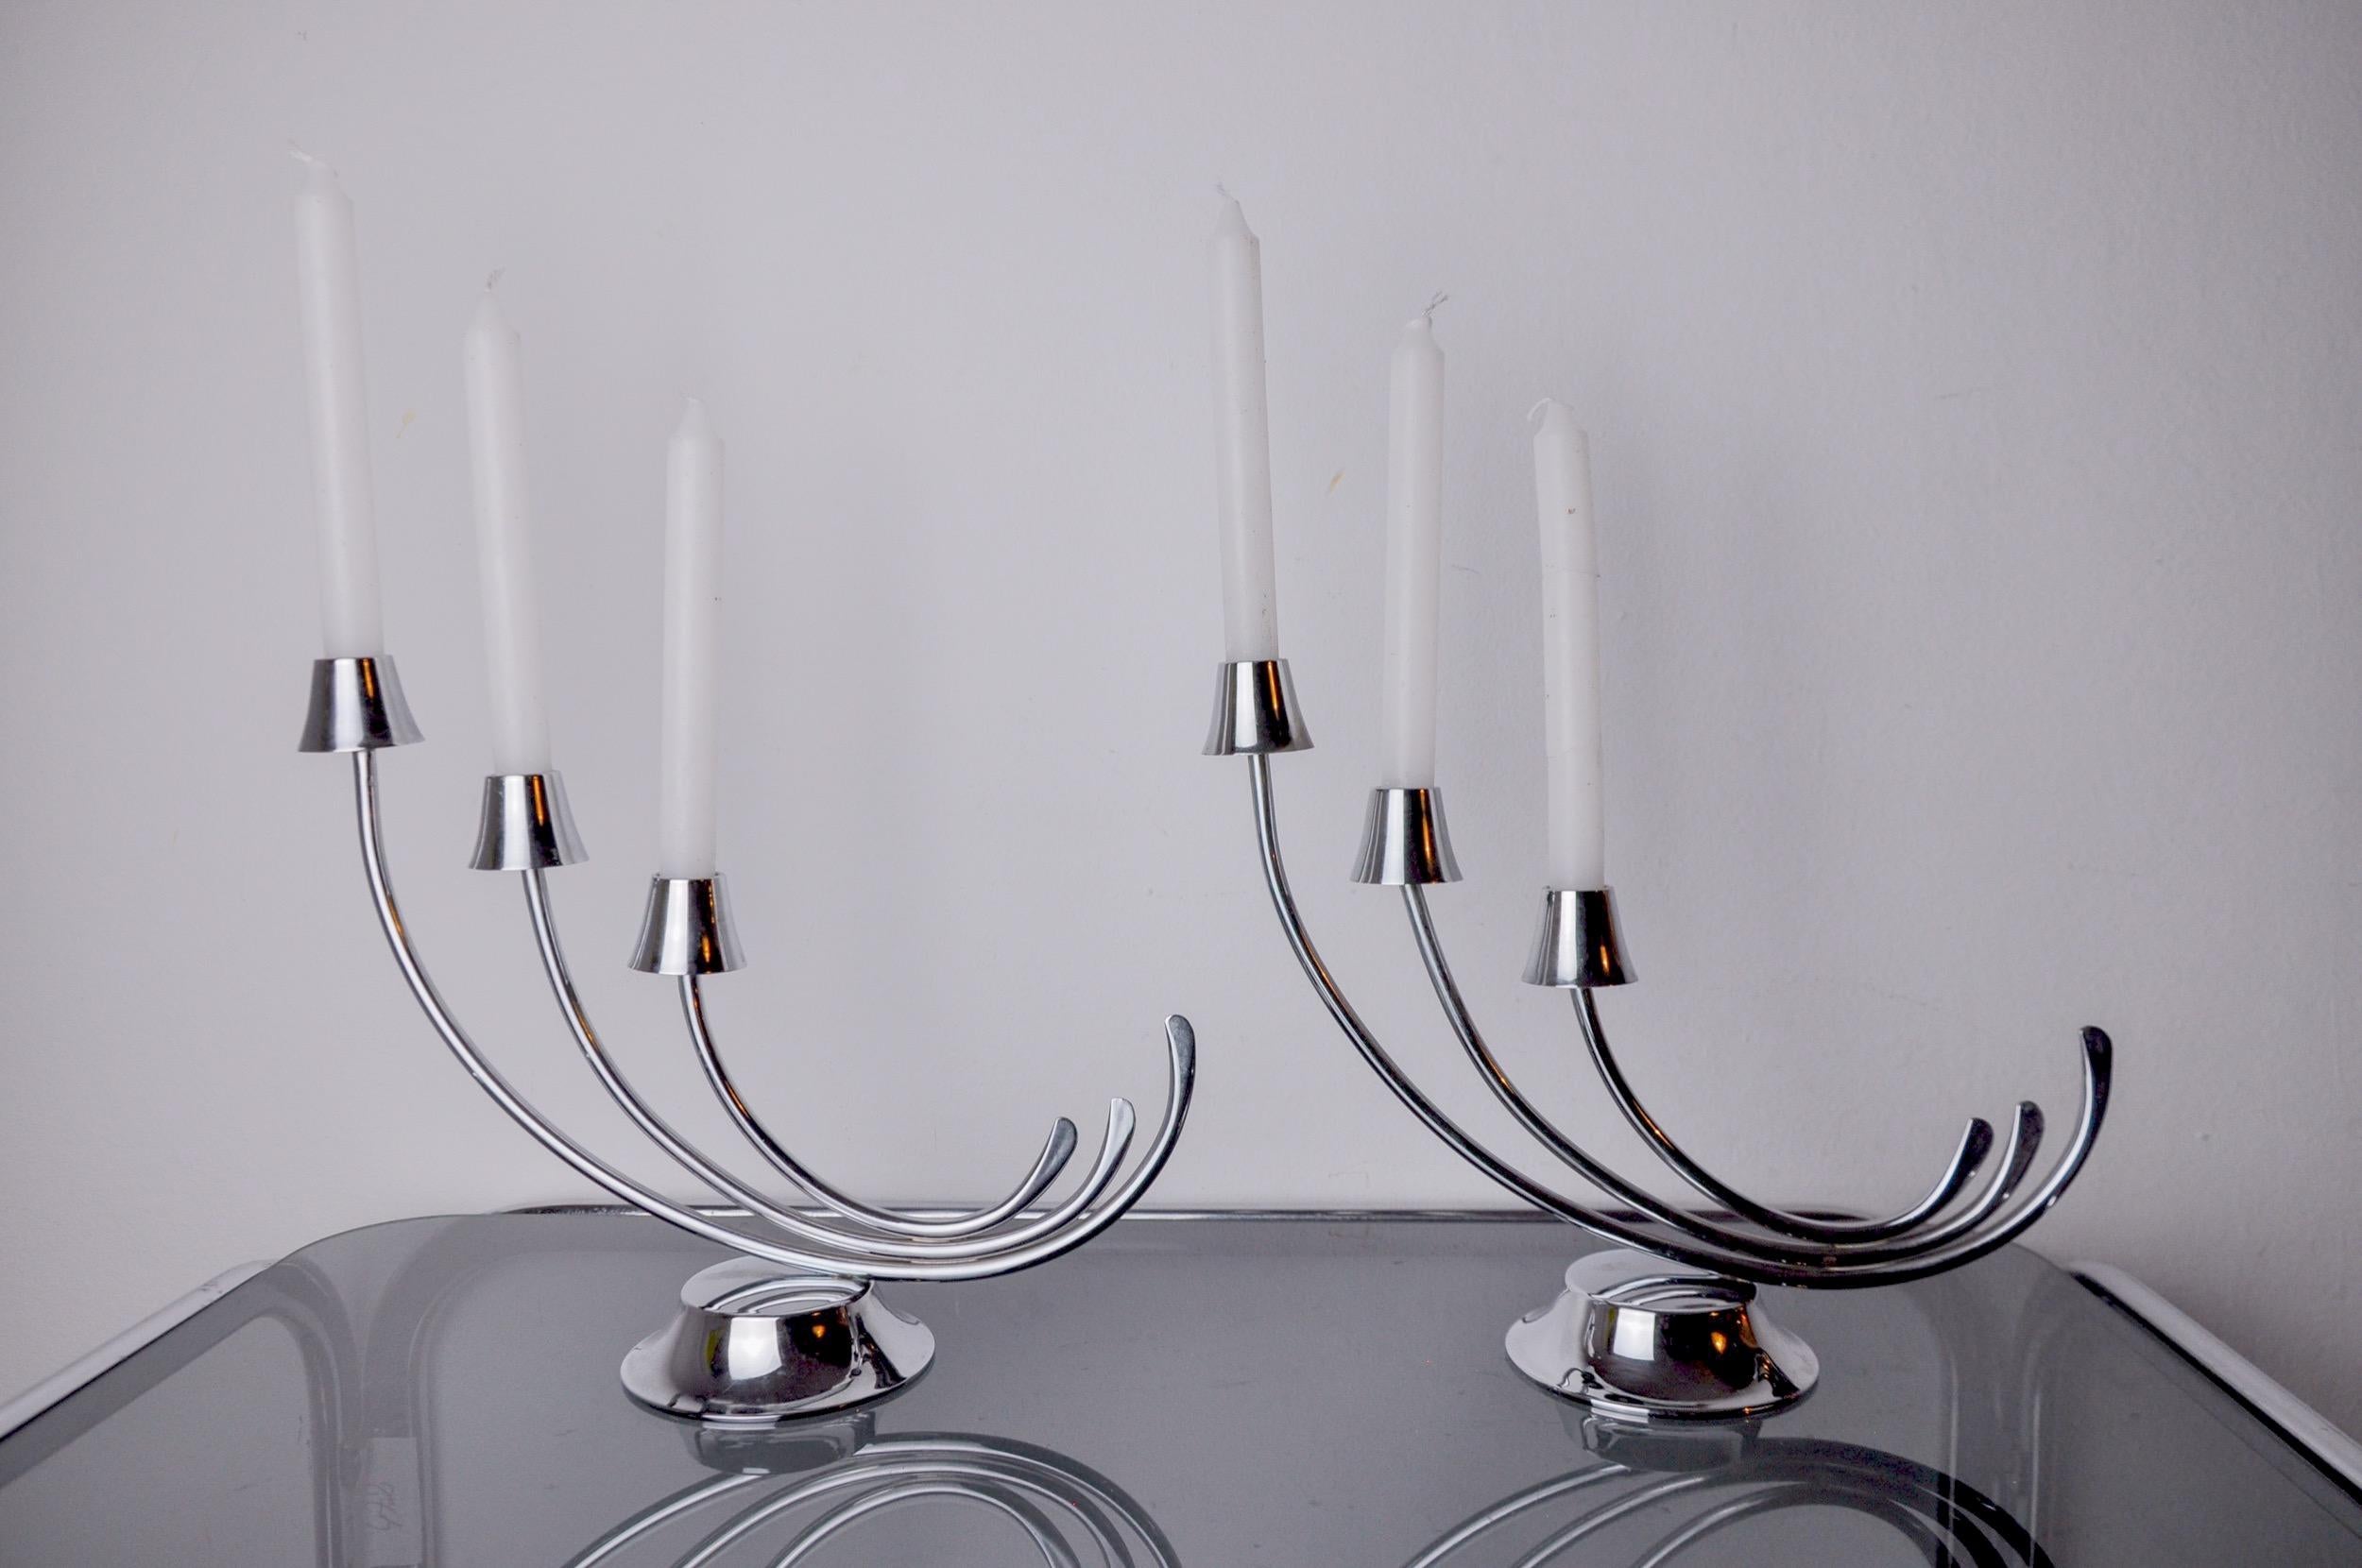 Very beautiful pair of art deco stainless steel candlesticks designed and produced in Spain in the 1970s. Structure in 18/8 stainless steel that can accommodate 3 candles. Superb designer object that will decorate your interior wonderfully. Very